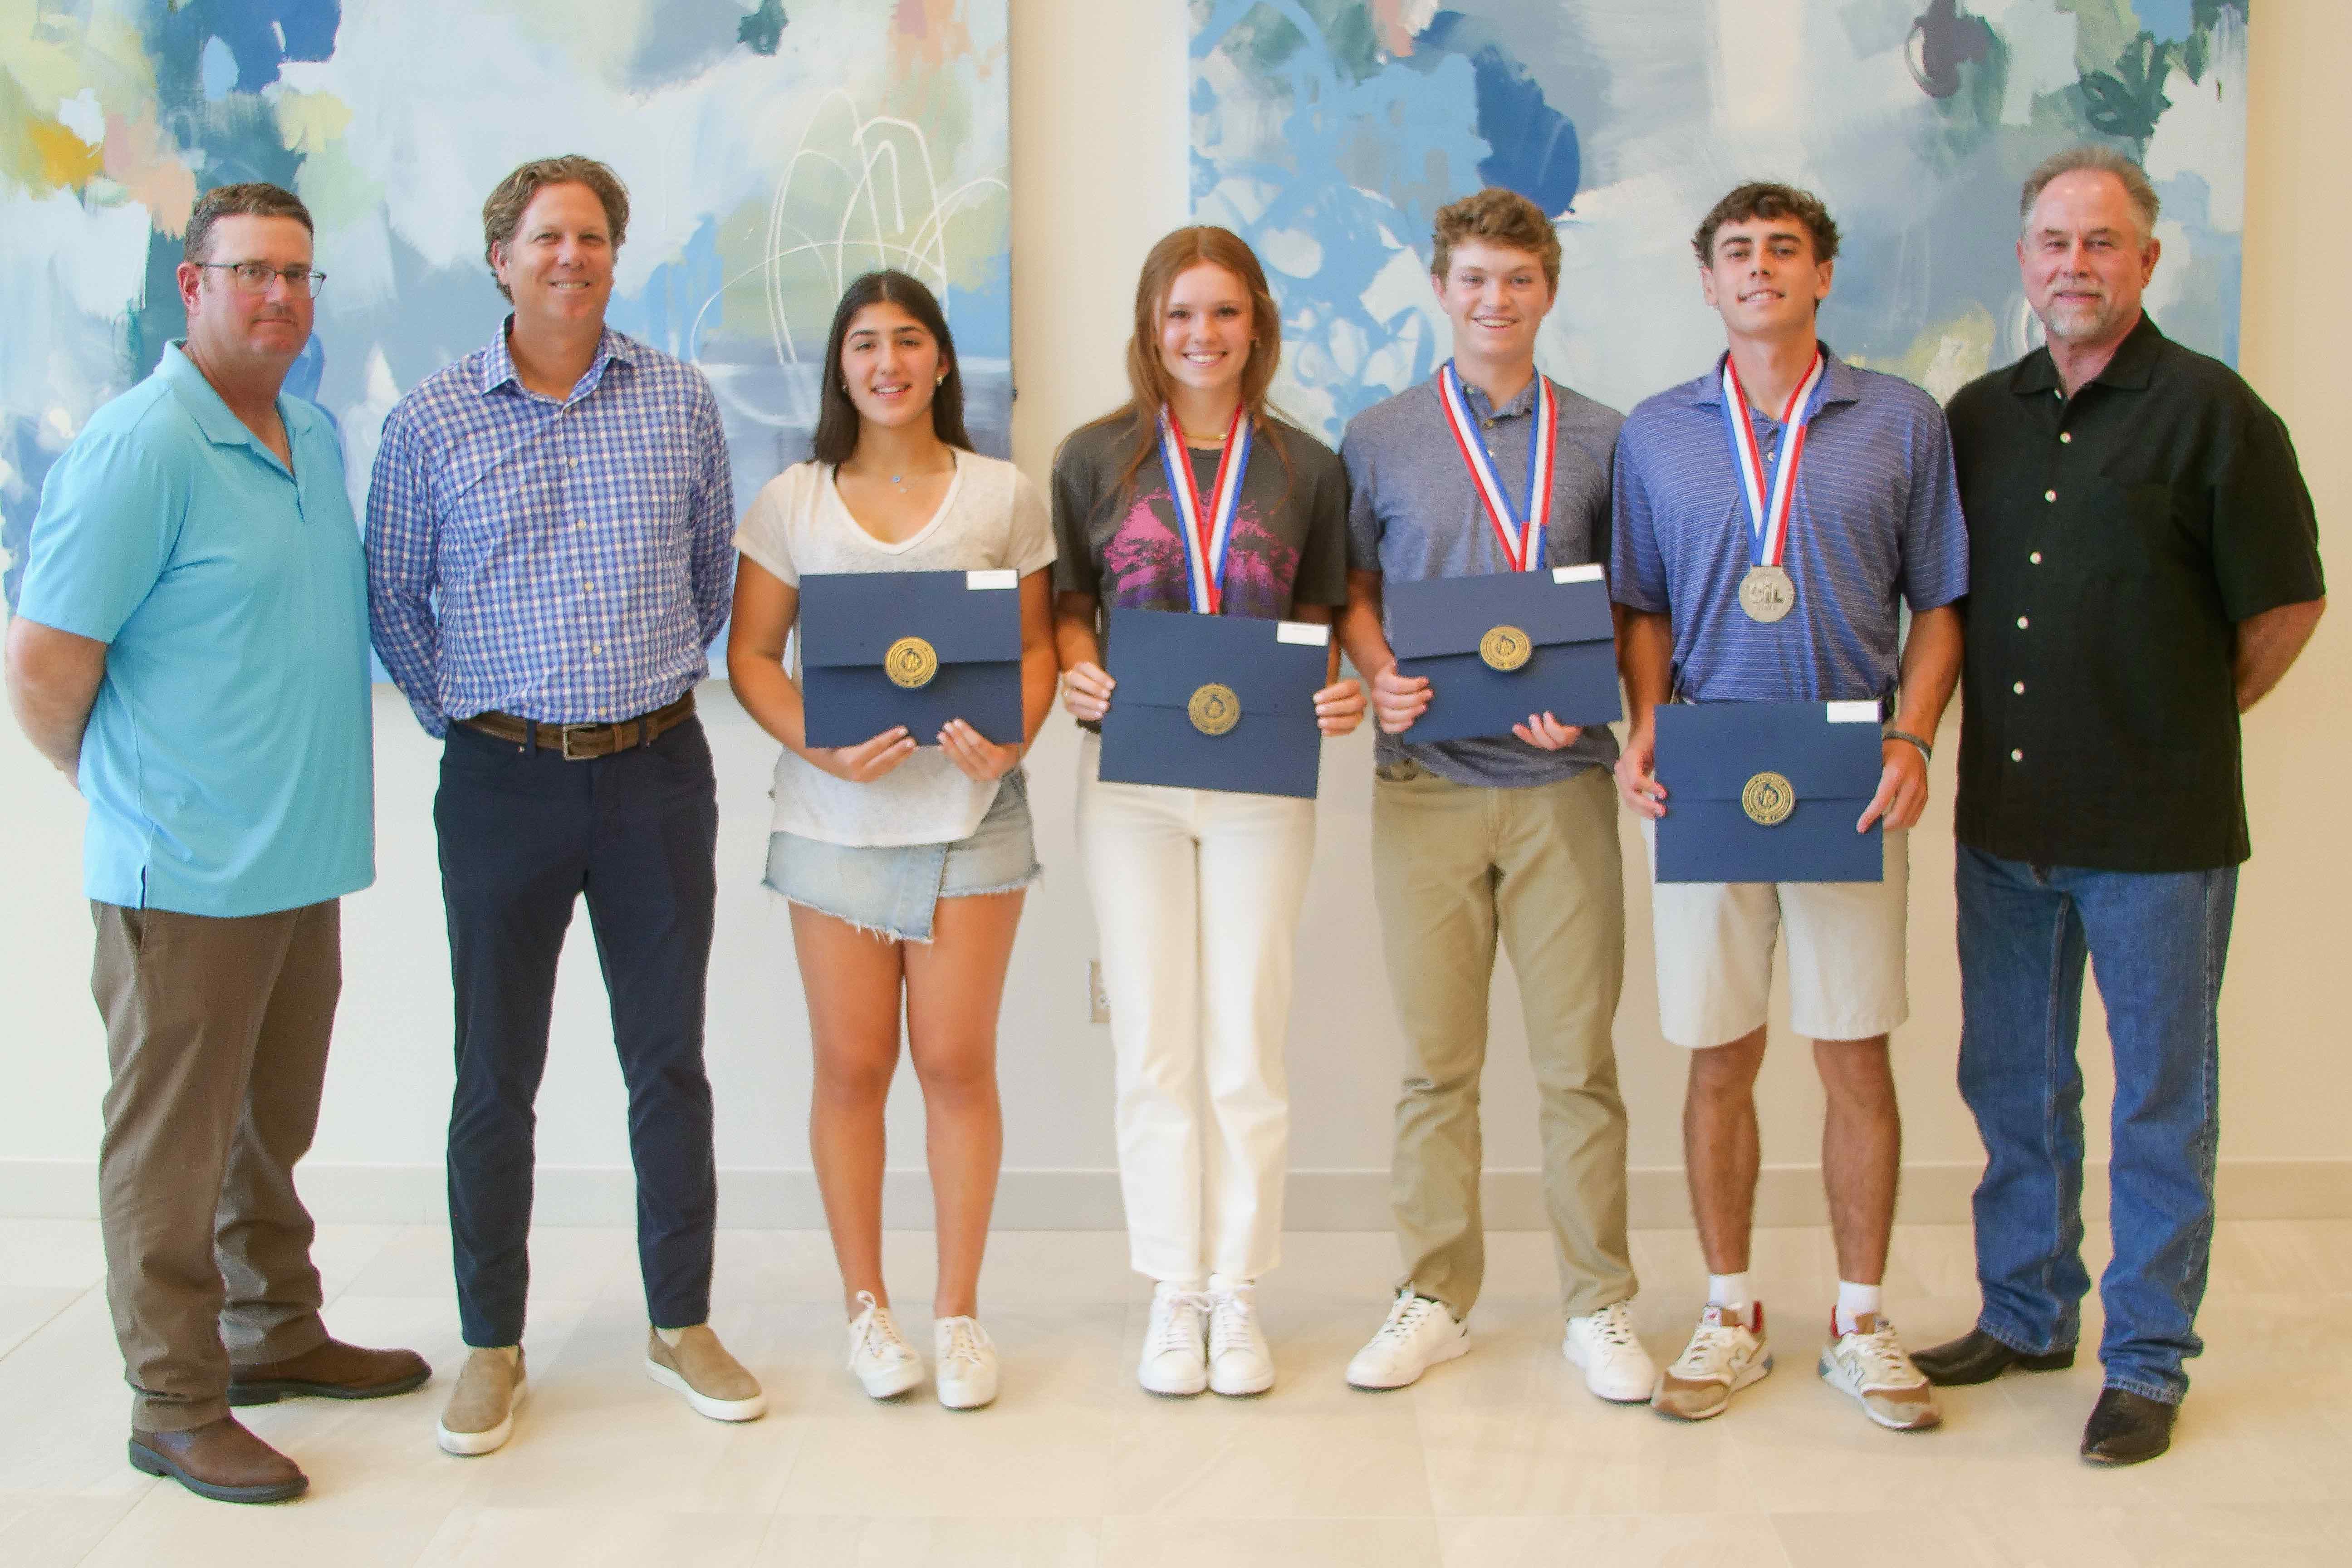 HPHS Doubles Tennis State Accomplishment Recognized May 2022